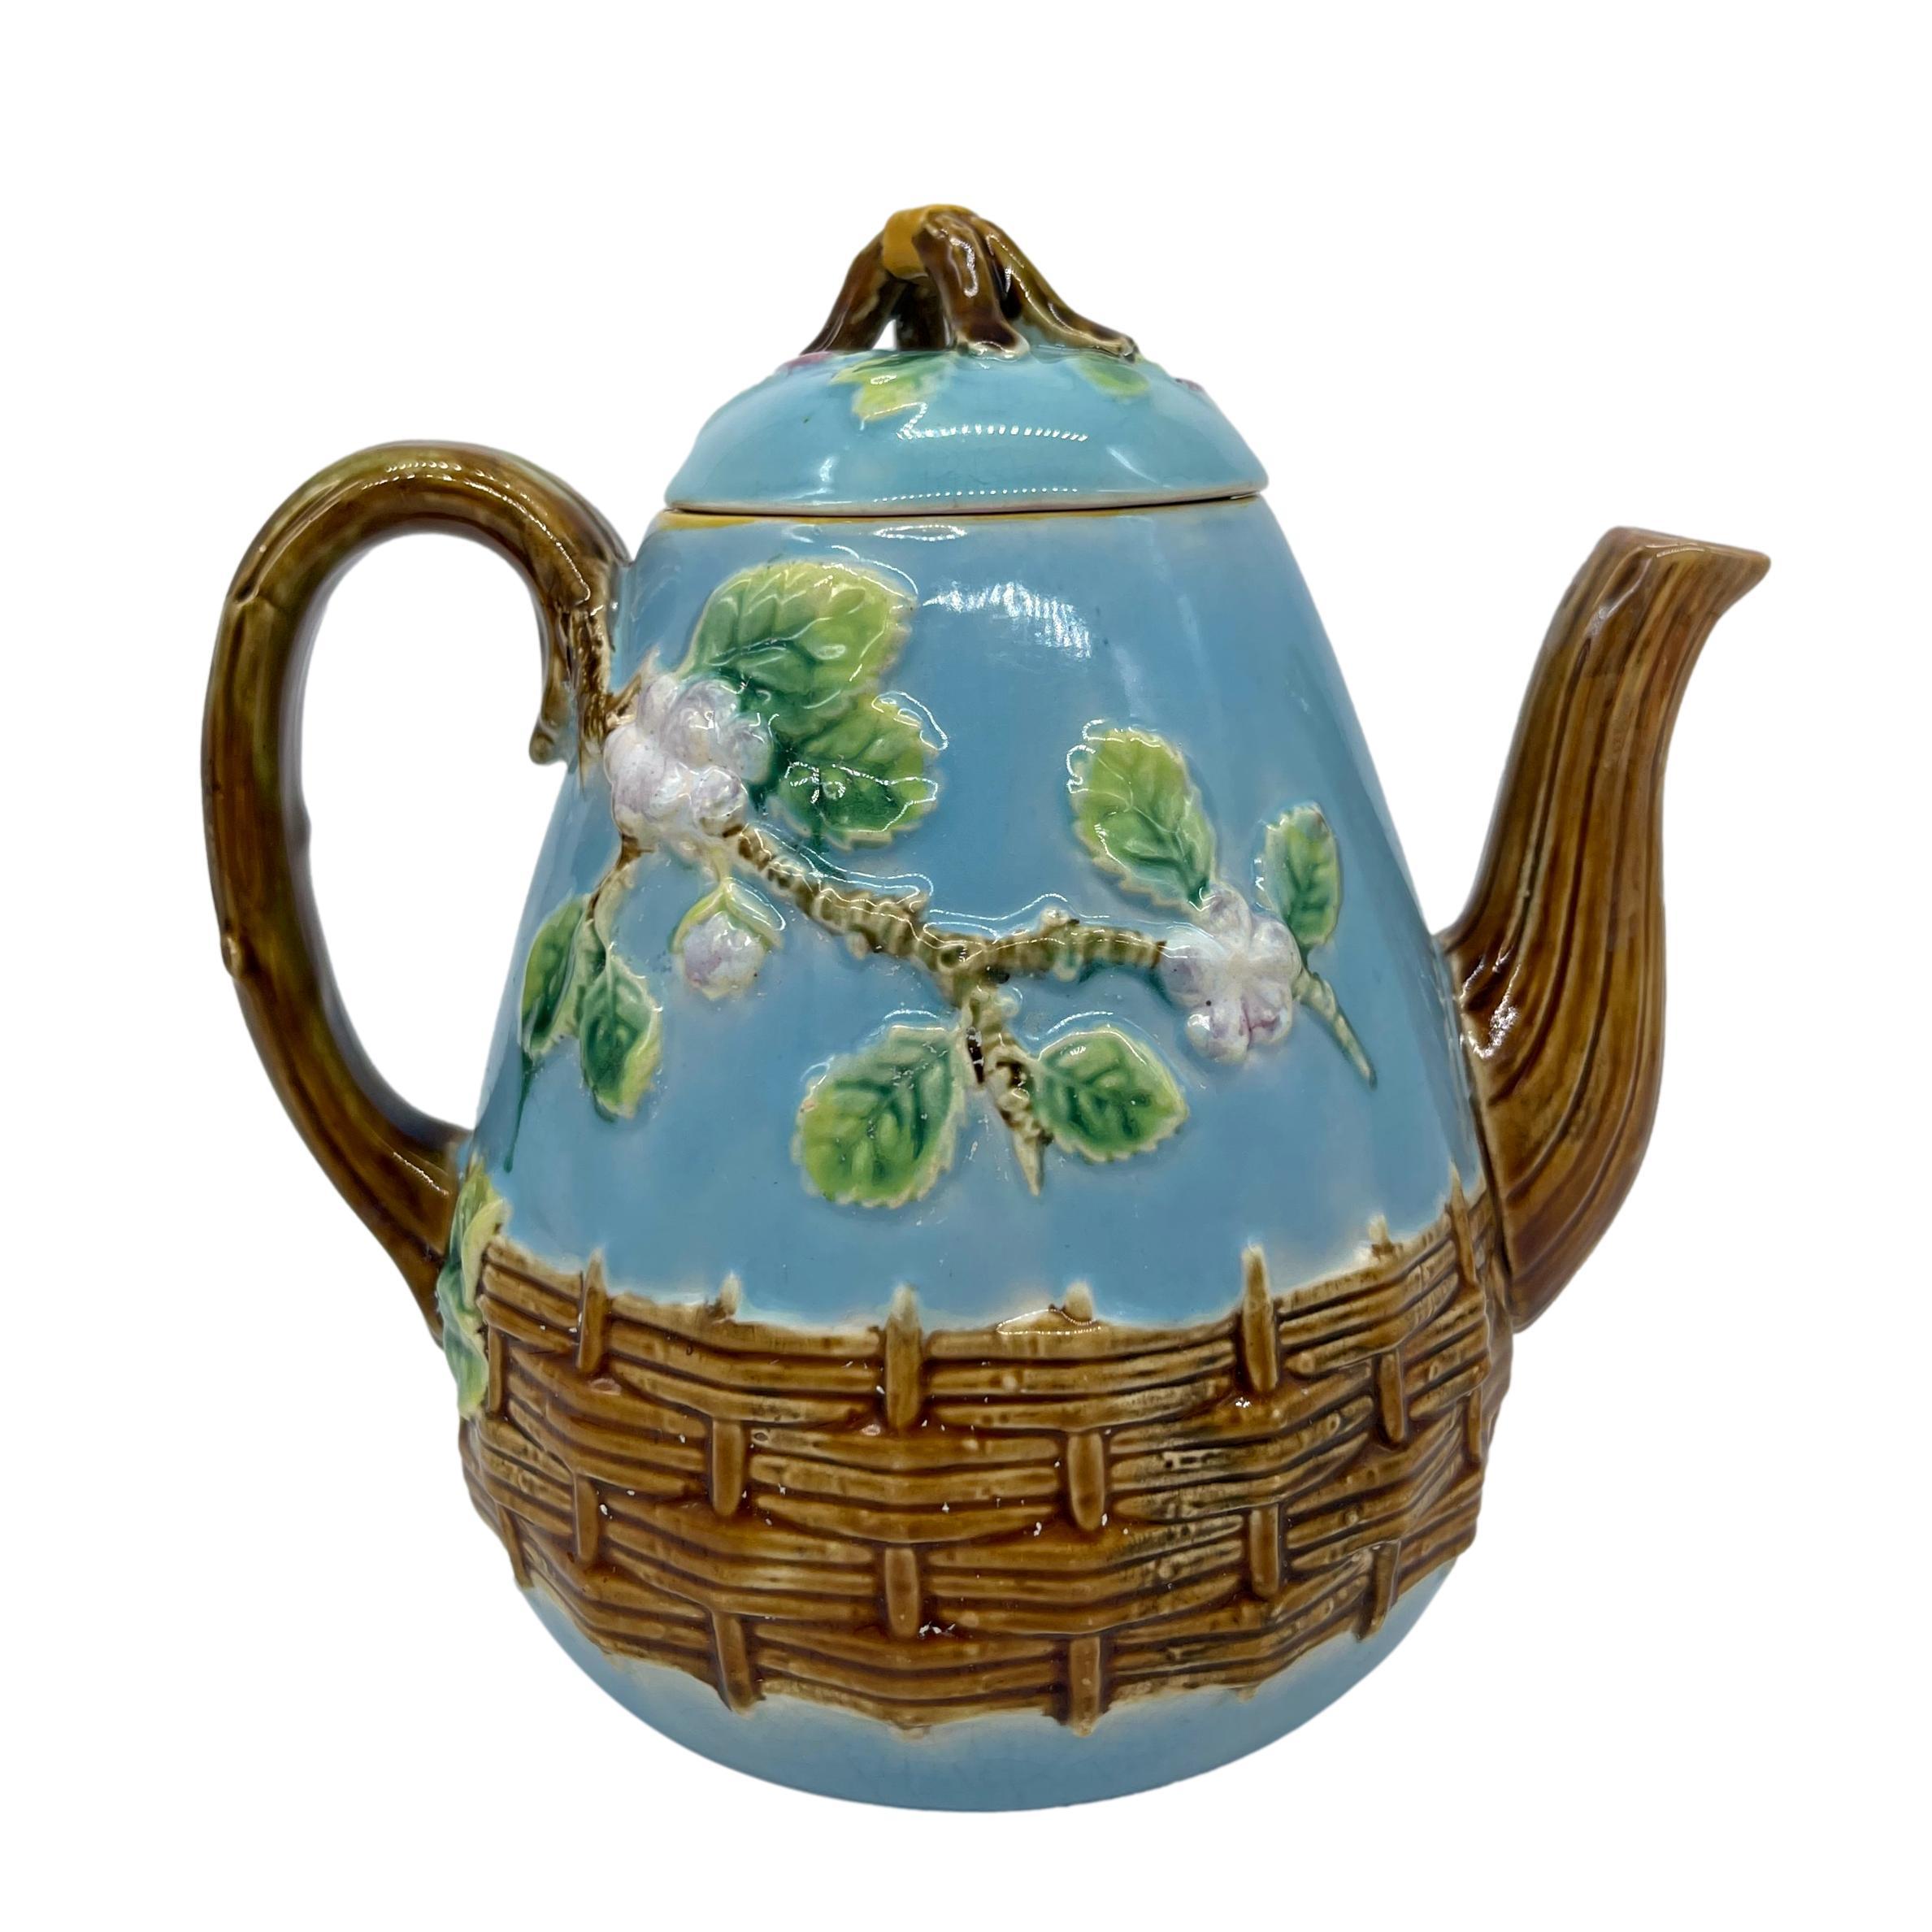 George Jones Majolica 'Apple Blossom' Teapot Basketweave on Turquoise, ca. 1873 In Good Condition For Sale In Banner Elk, NC